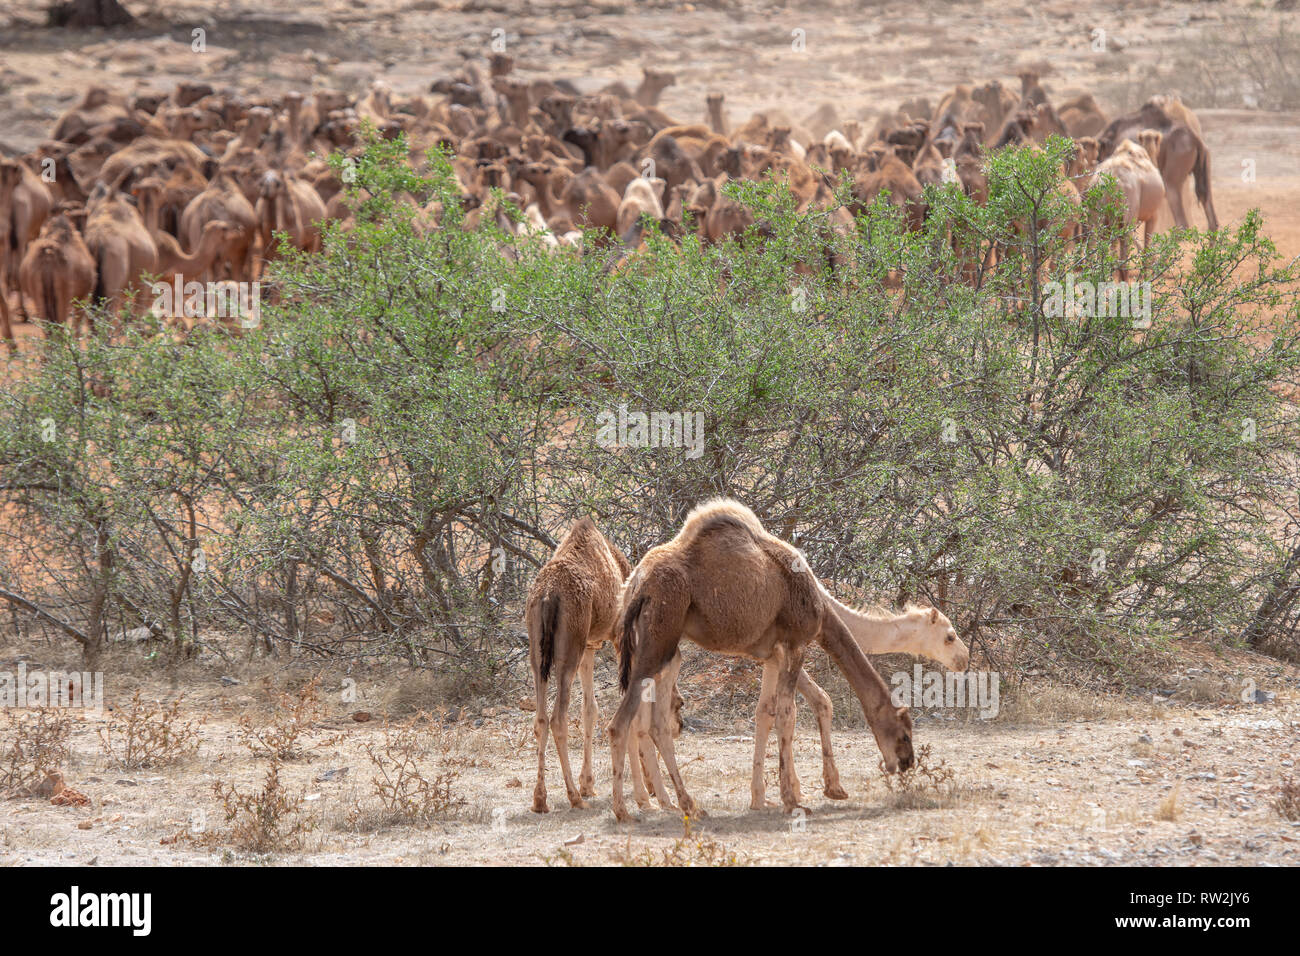 A pair of camels (Camelus) grazes on small shrubs, Guelmim, Guelmim province, Morocco. Stock Photo